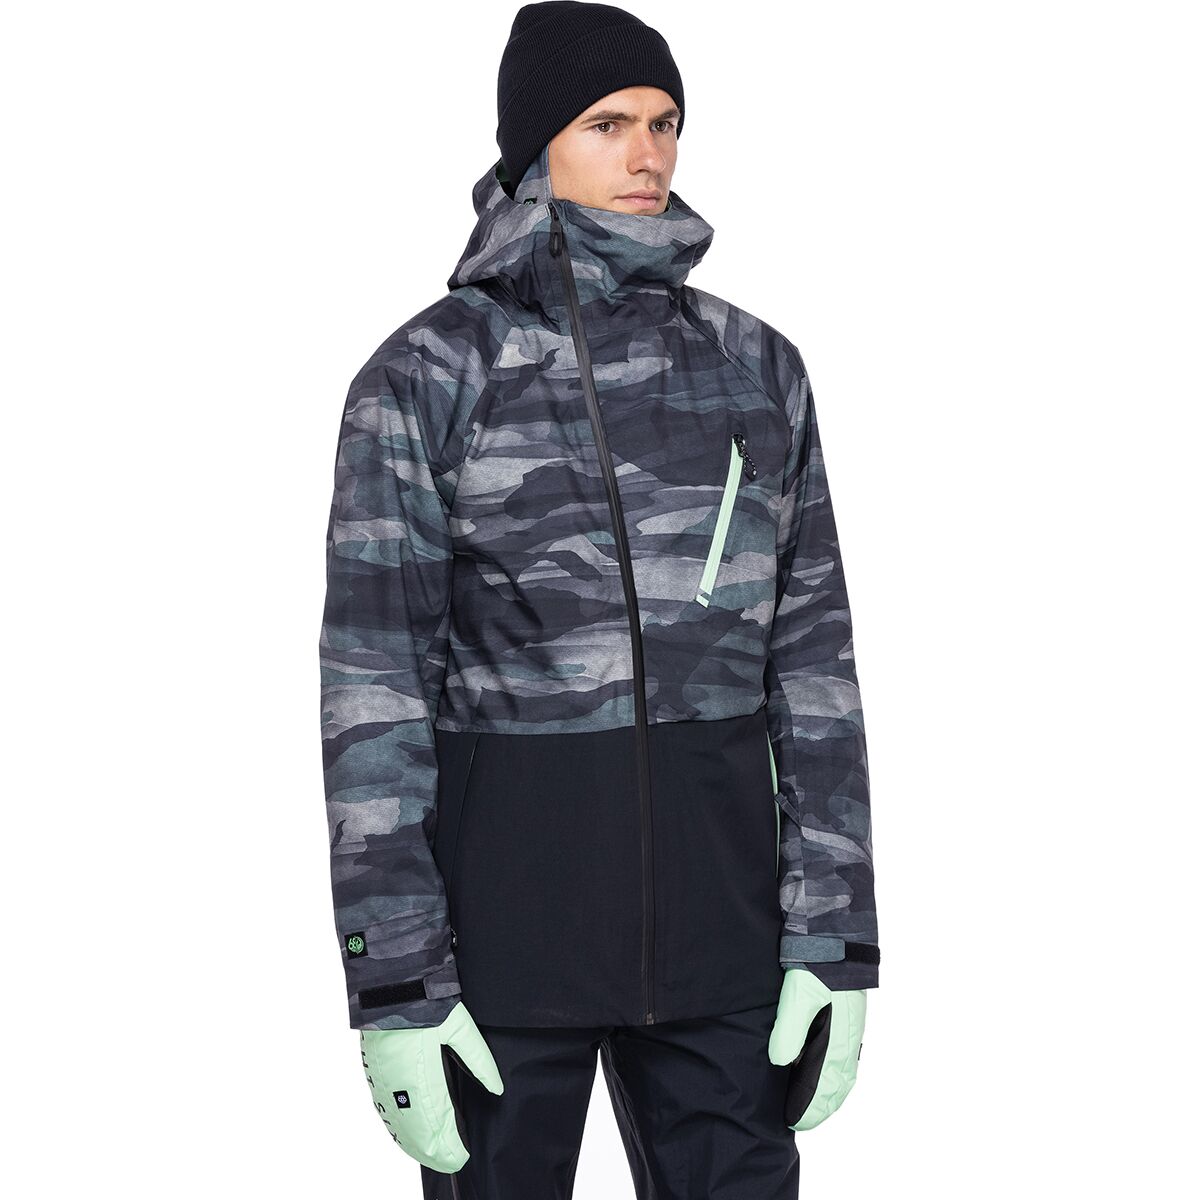 686 Hydra Down Thermagraph GORE-TEX Jacket - Men's - Clothing